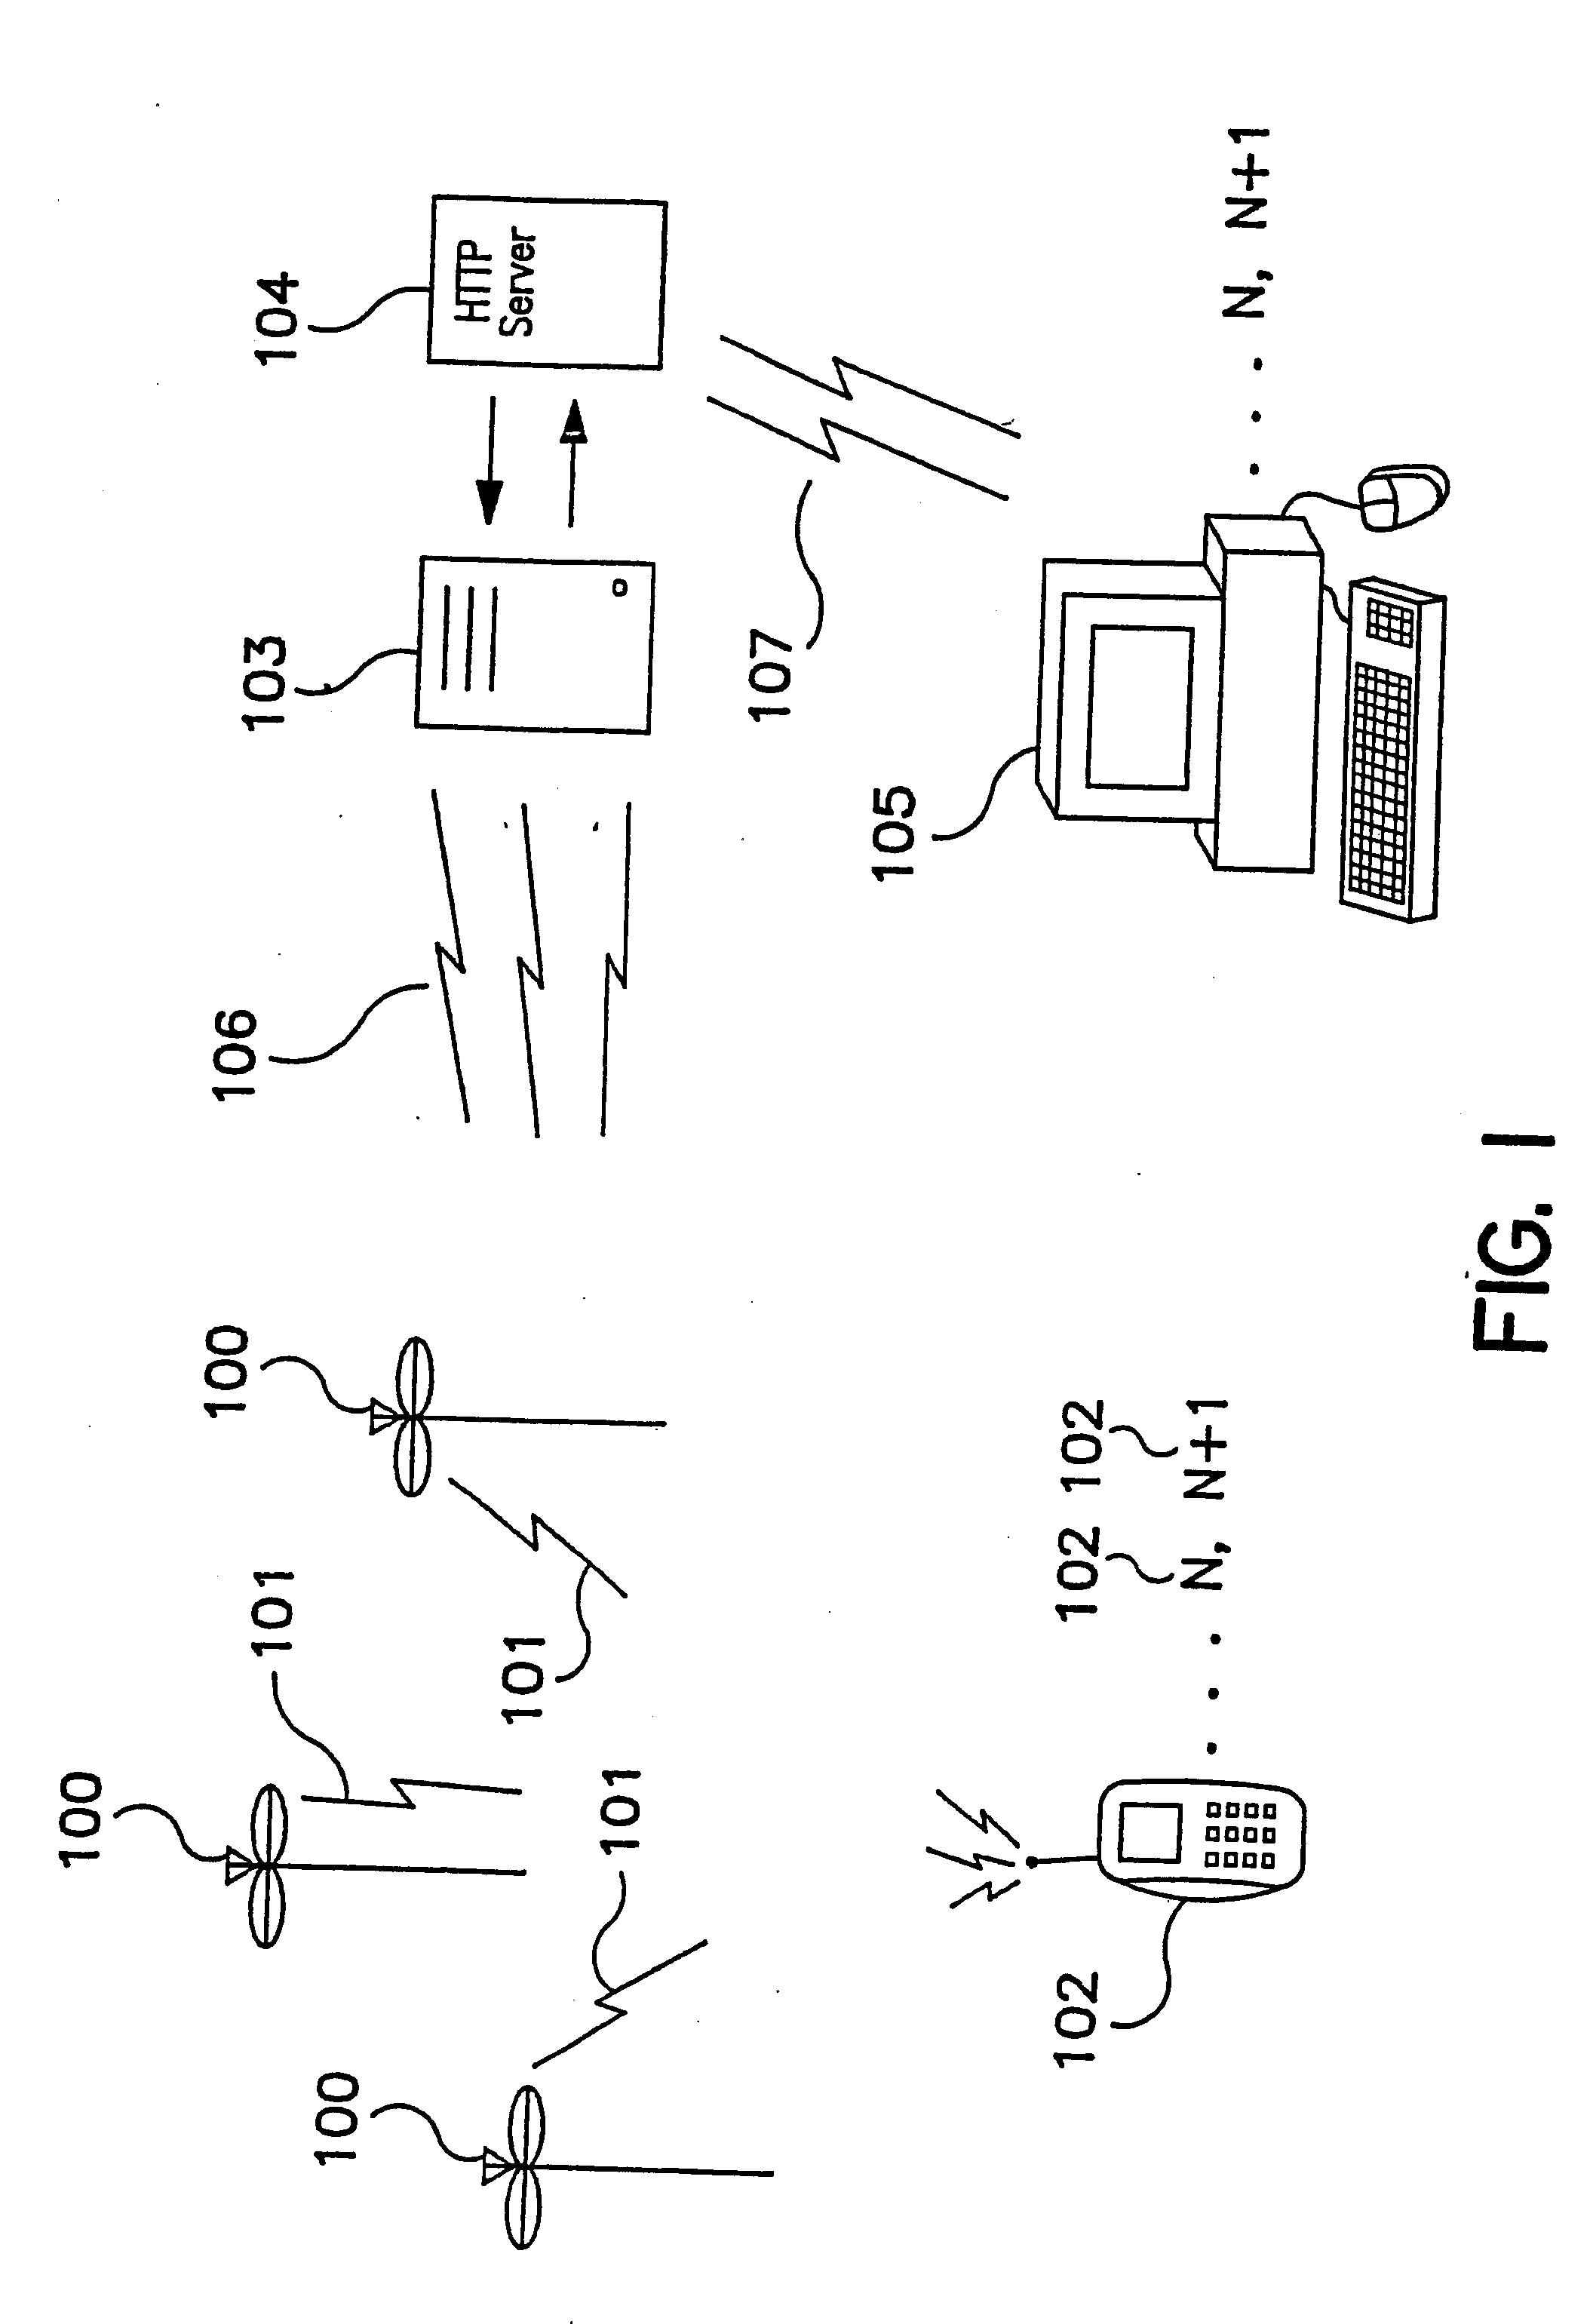 System and method of accessing and recording messages at coordinate way points